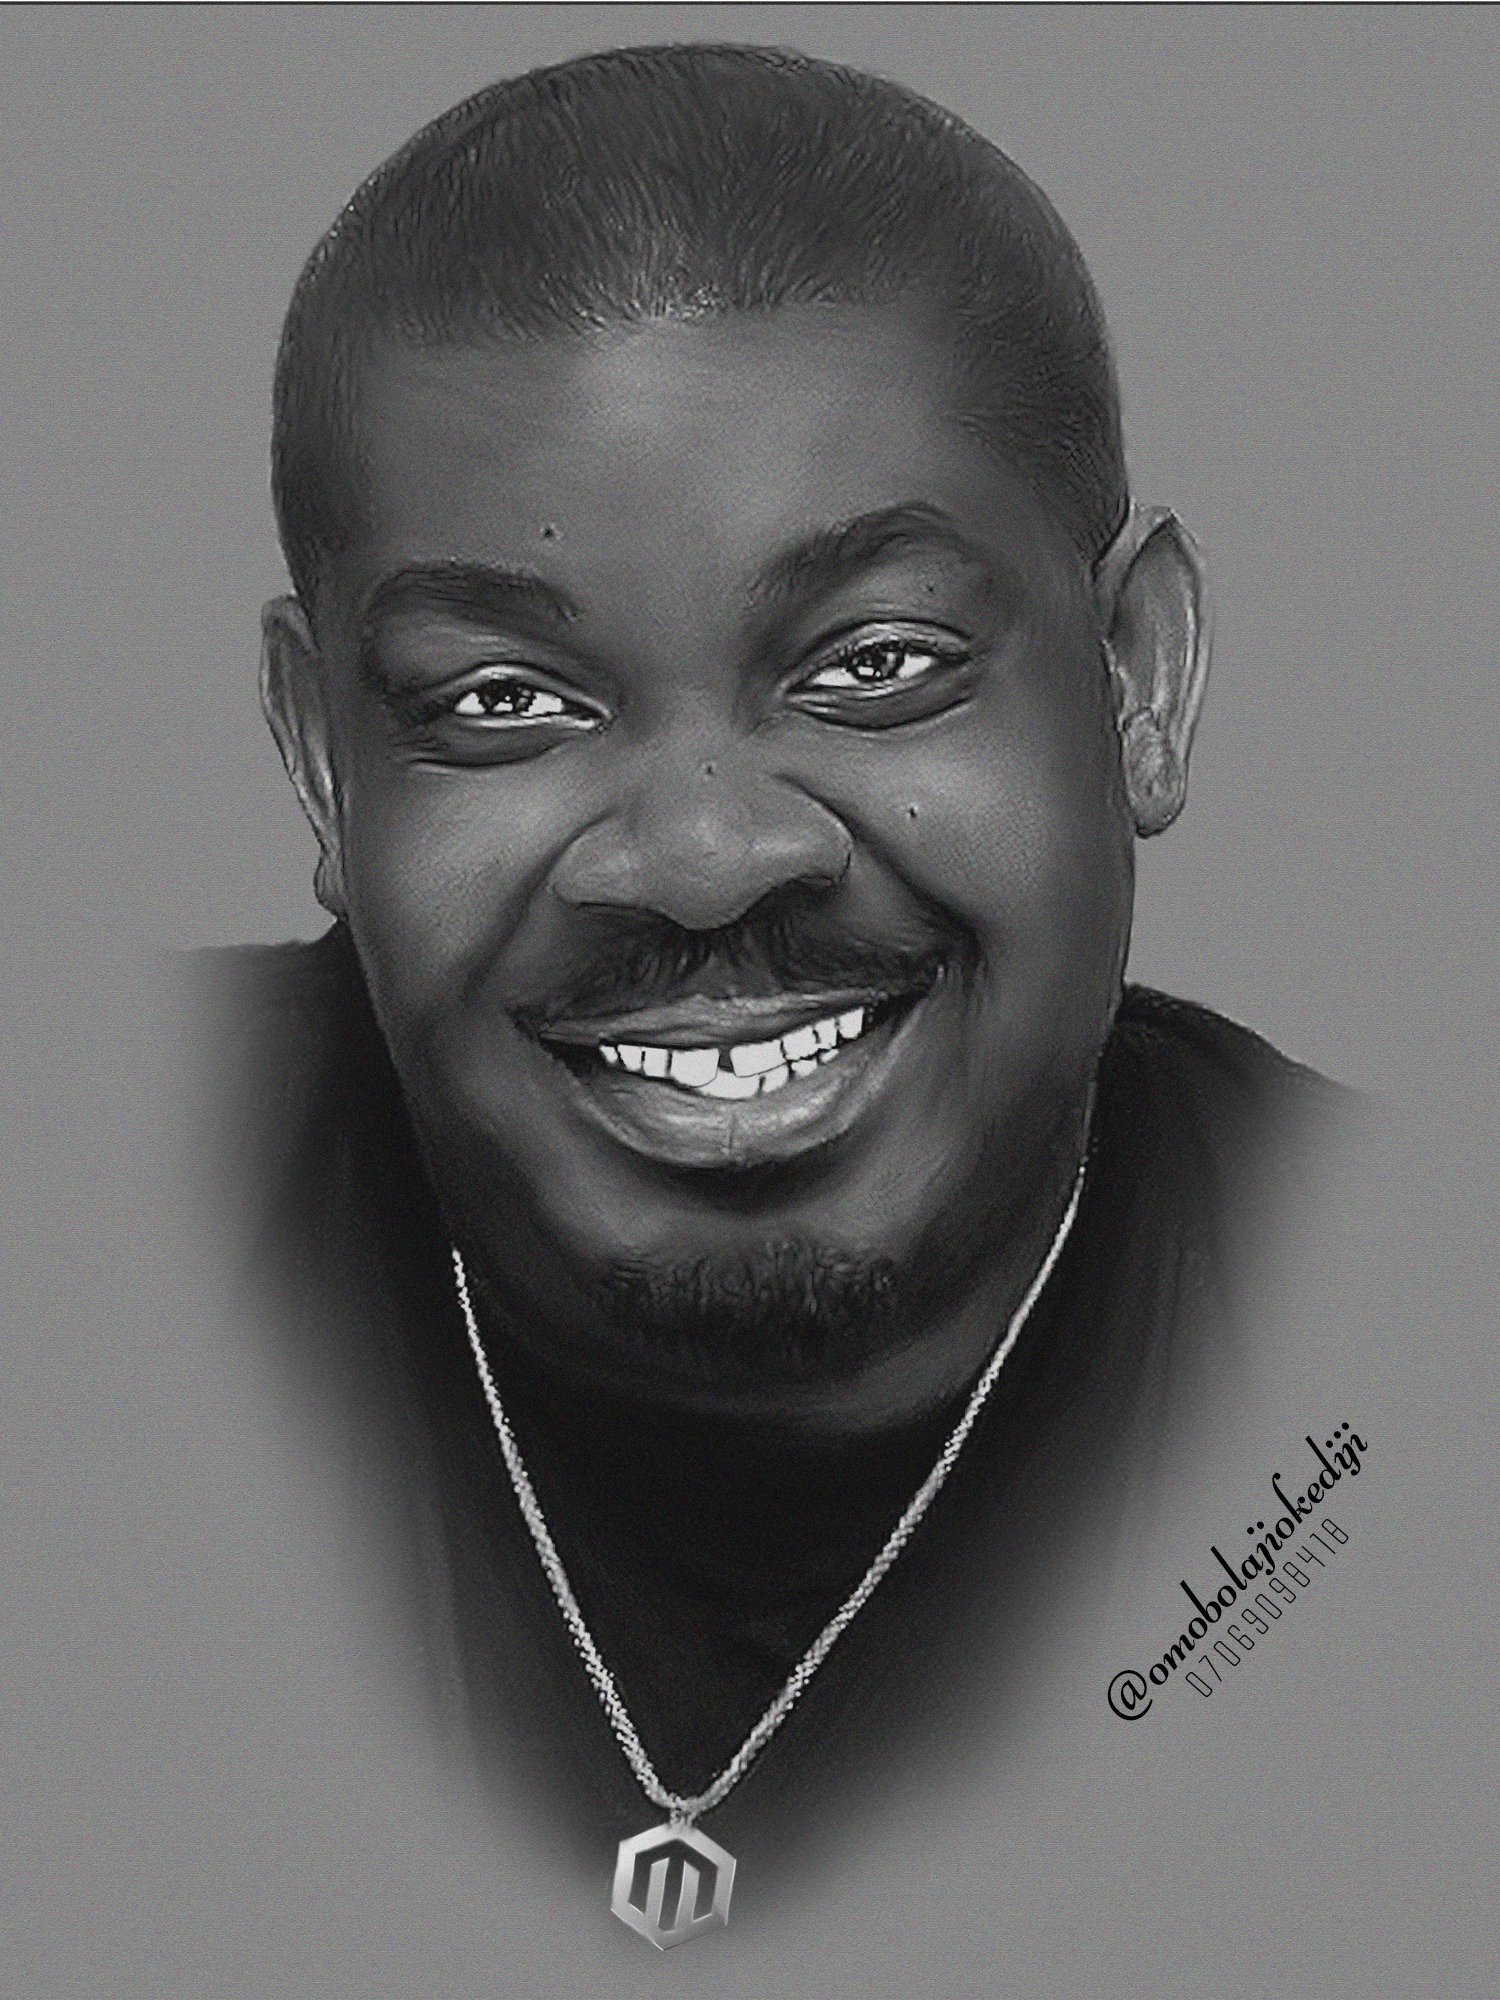 Happy Birthday Don Jazzy
Continue to be a blessing boss    